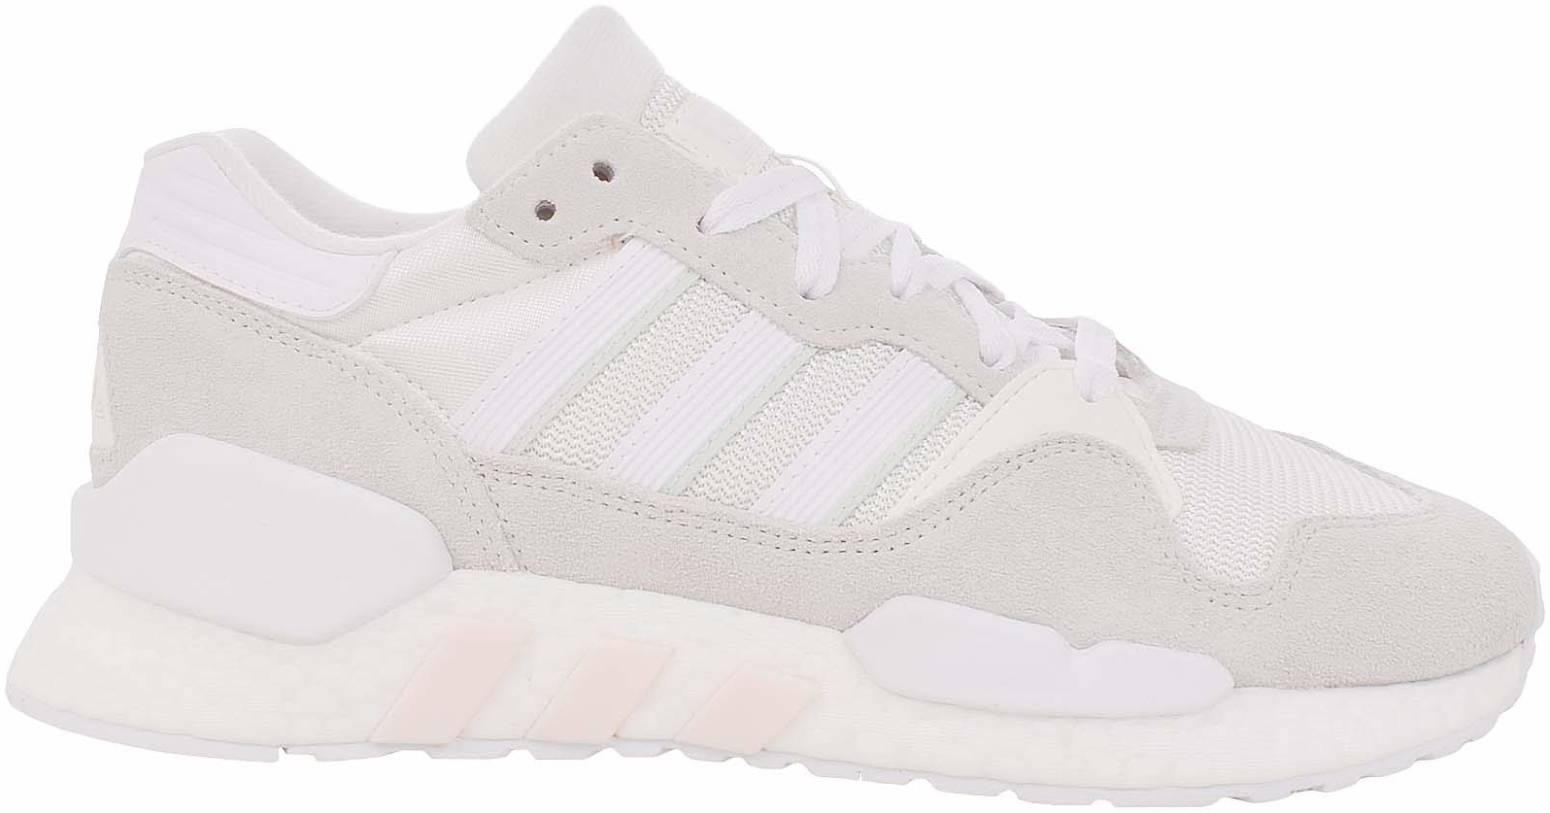 Adidas ZX930XEQT sneakers in white + black (only $75) | RunRepeat